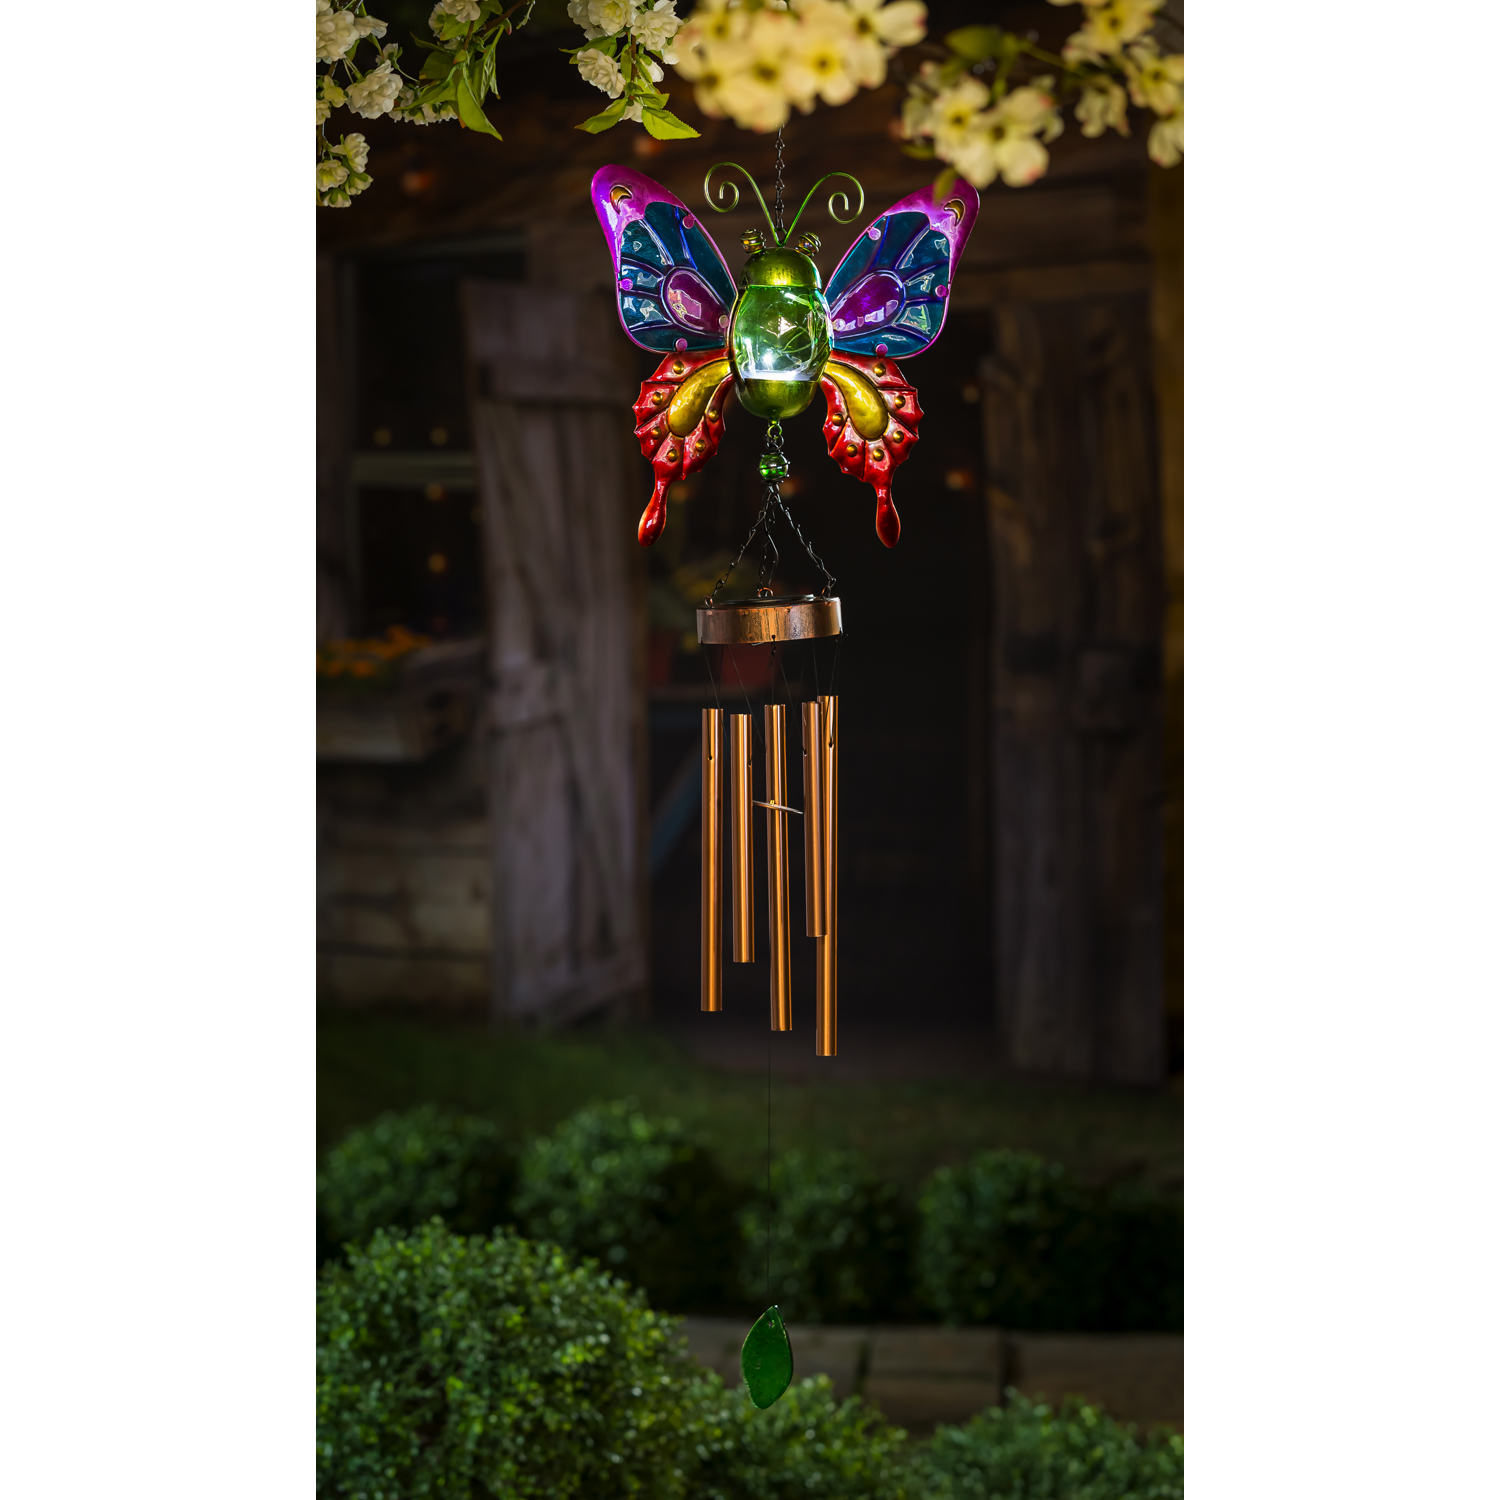 Evergreen Twinkling Light Solar Glass and Metal Butterfly Wind Chime, 2 ASST., 13.4'' x 4.3'' x 43.3'' inches. - image 2 of 3